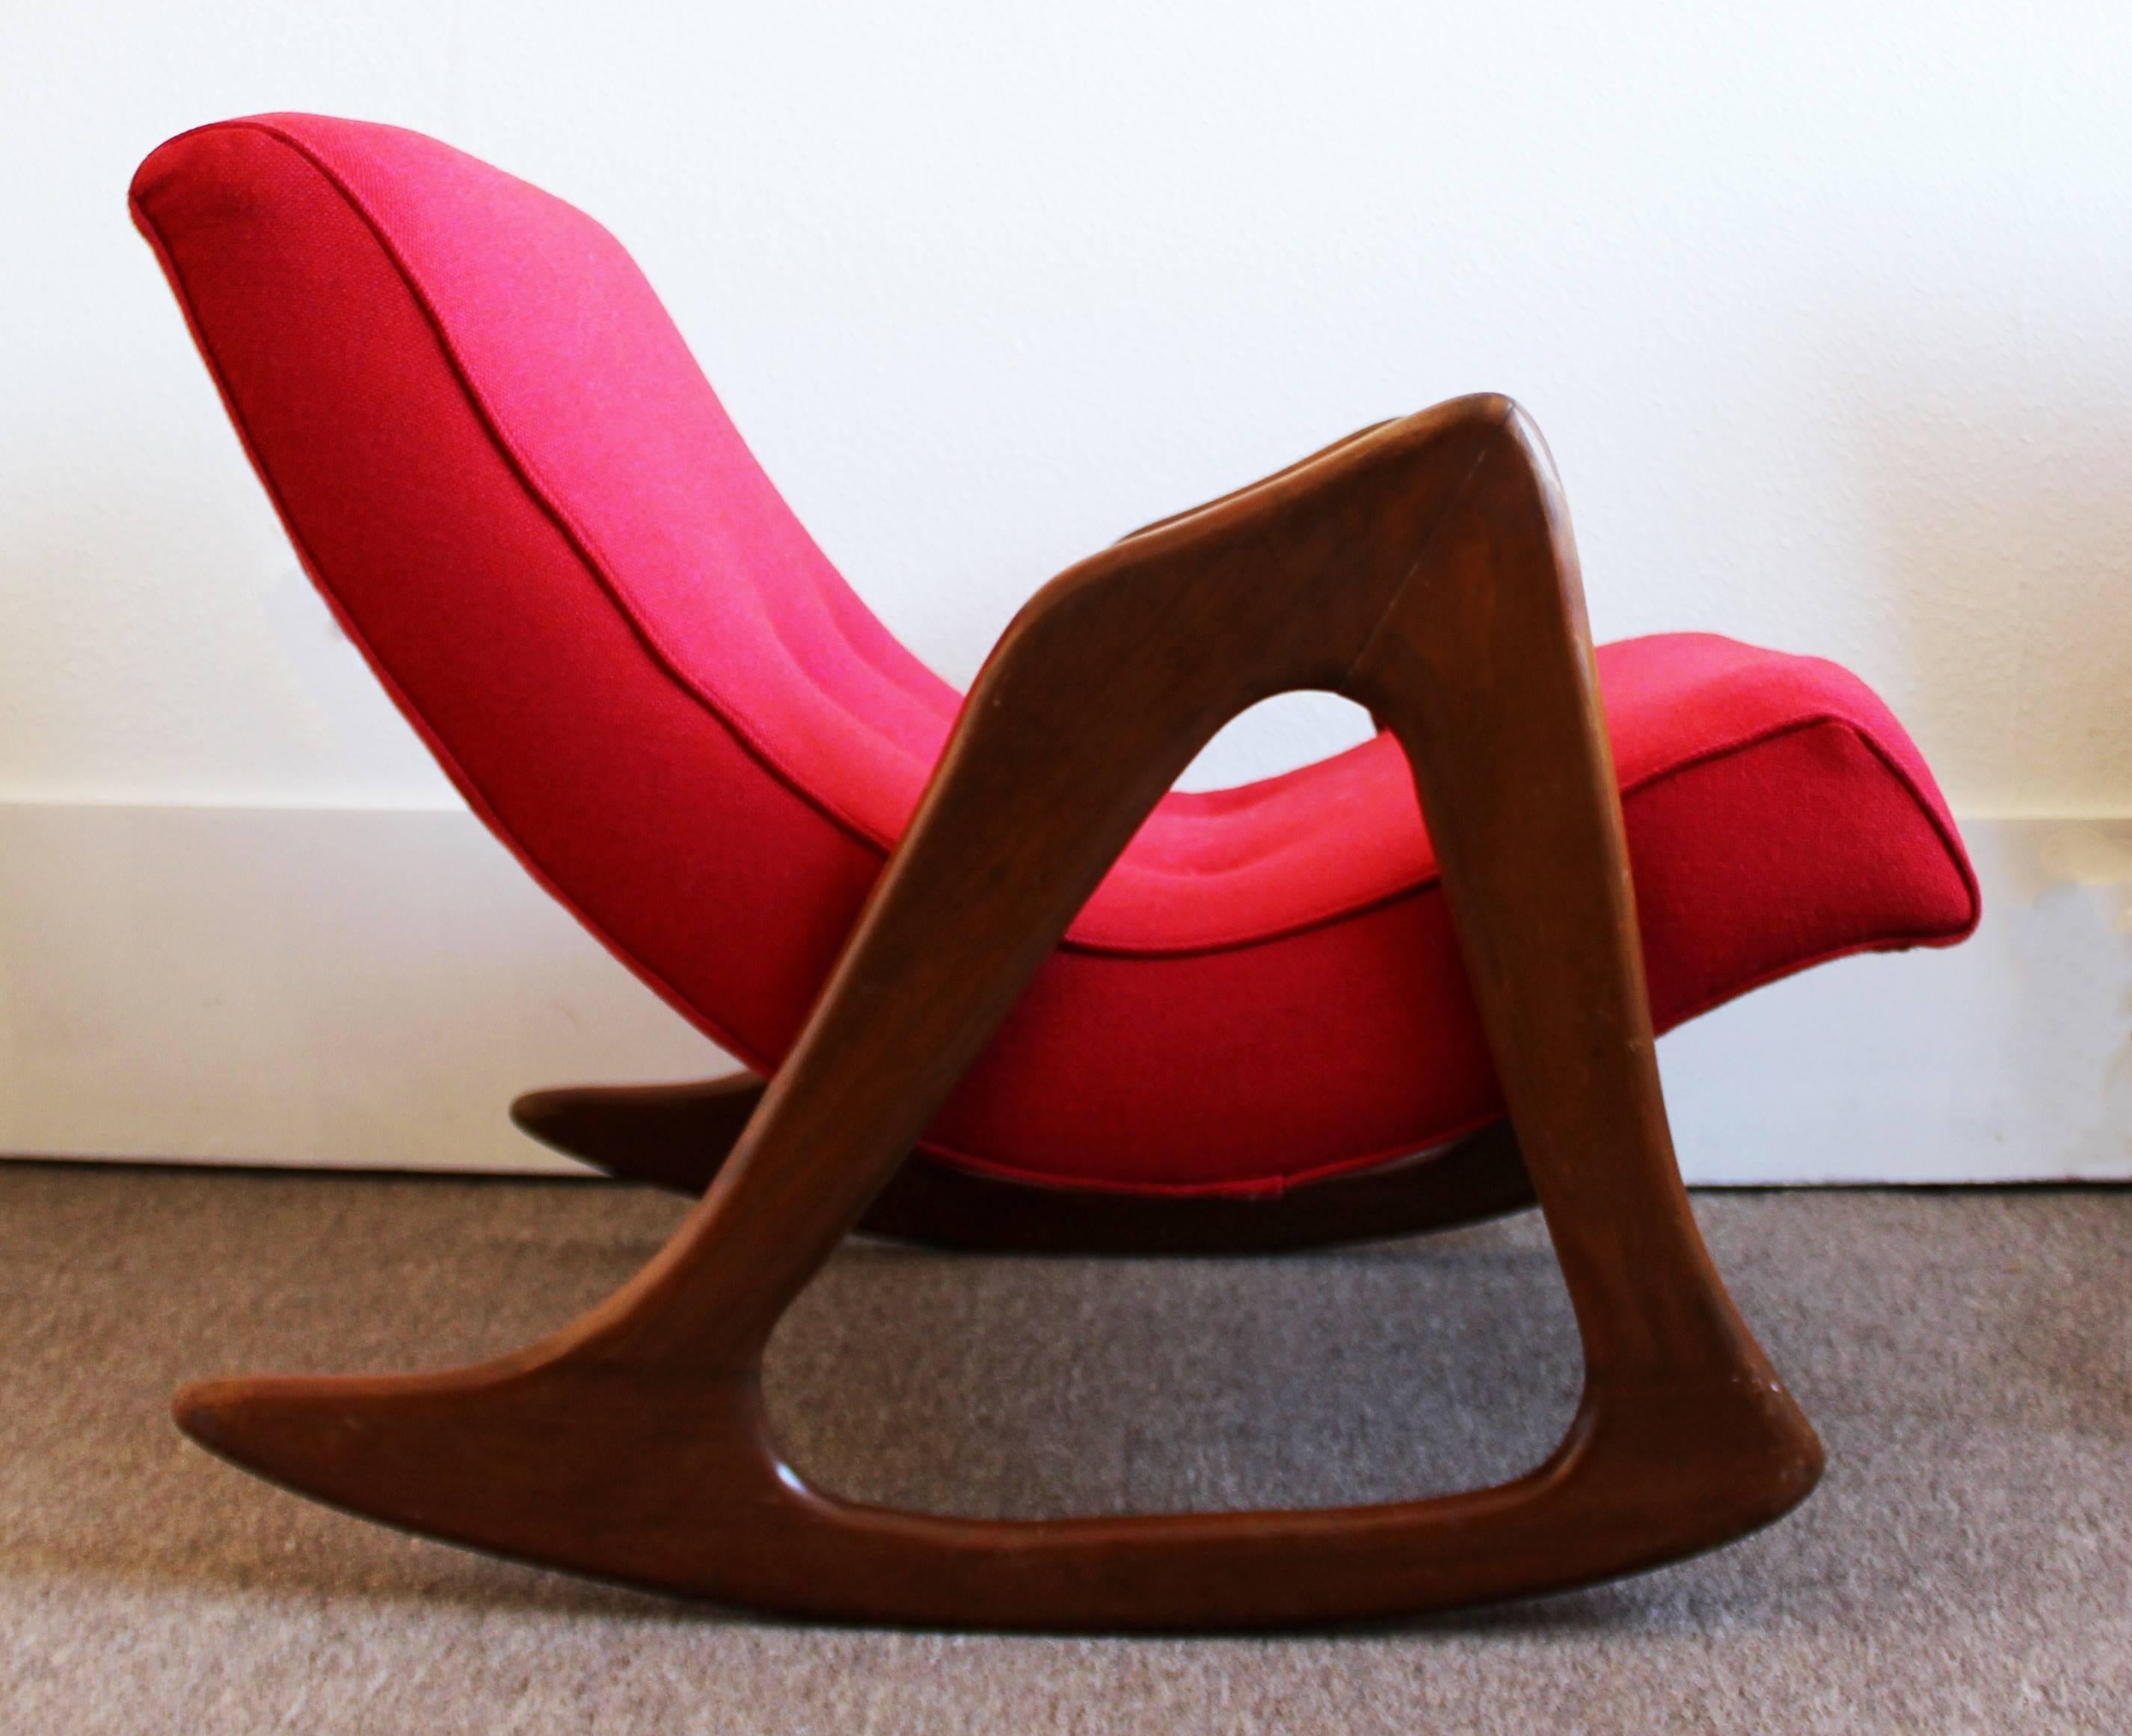 Comfortable, sturdy sculptural statement rocking chair by Adrian Pearsall. Made of solid walnut and professionally reupholstered in authentic vintage Halindale fabric. In excellent condition. The dimensions are 26" W x 36" (3') D x